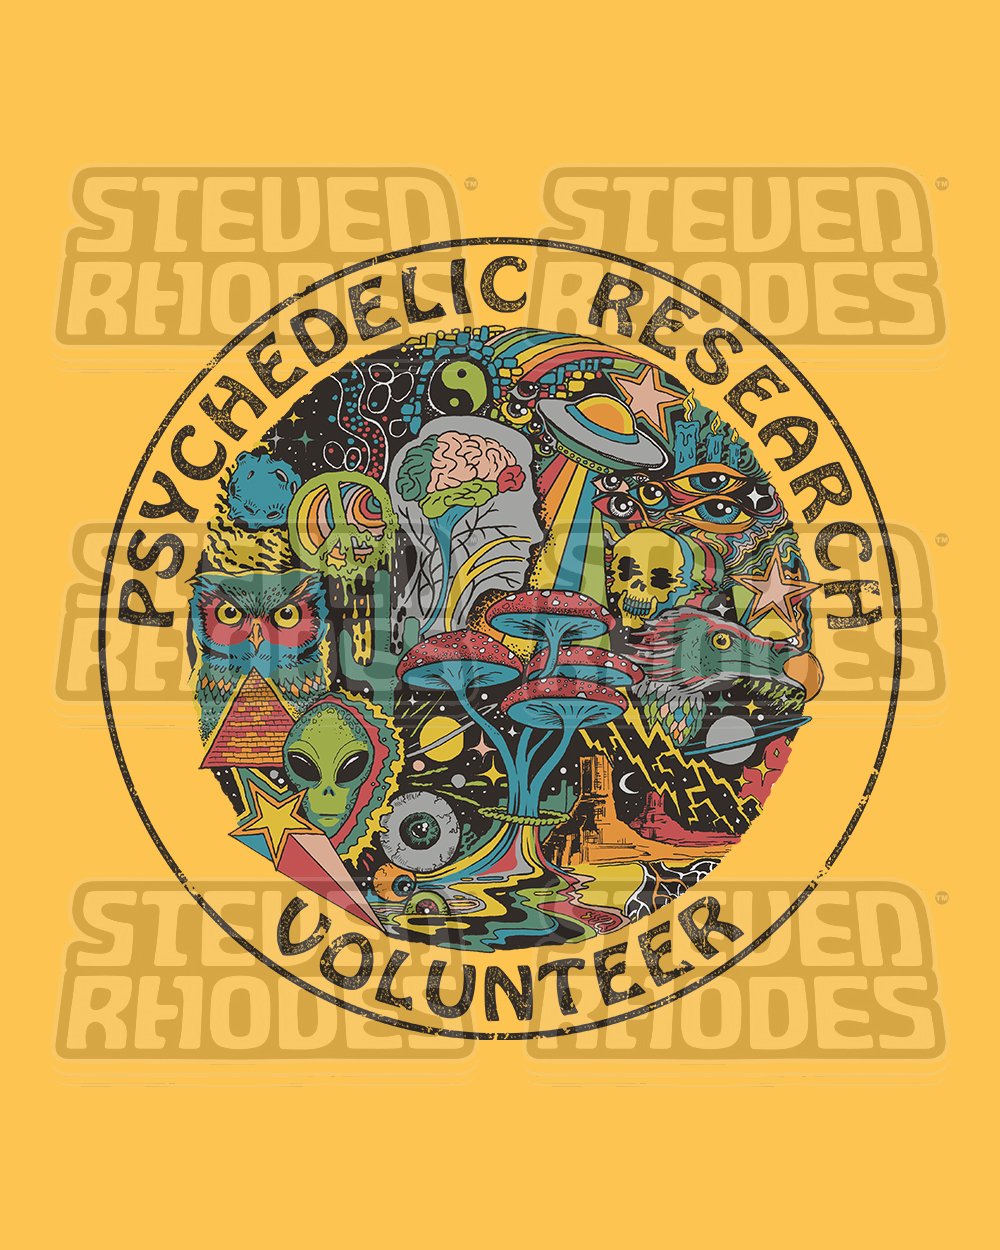 Psychedelic Research Volunteer T-Shirt Australia Online #colour_yellow